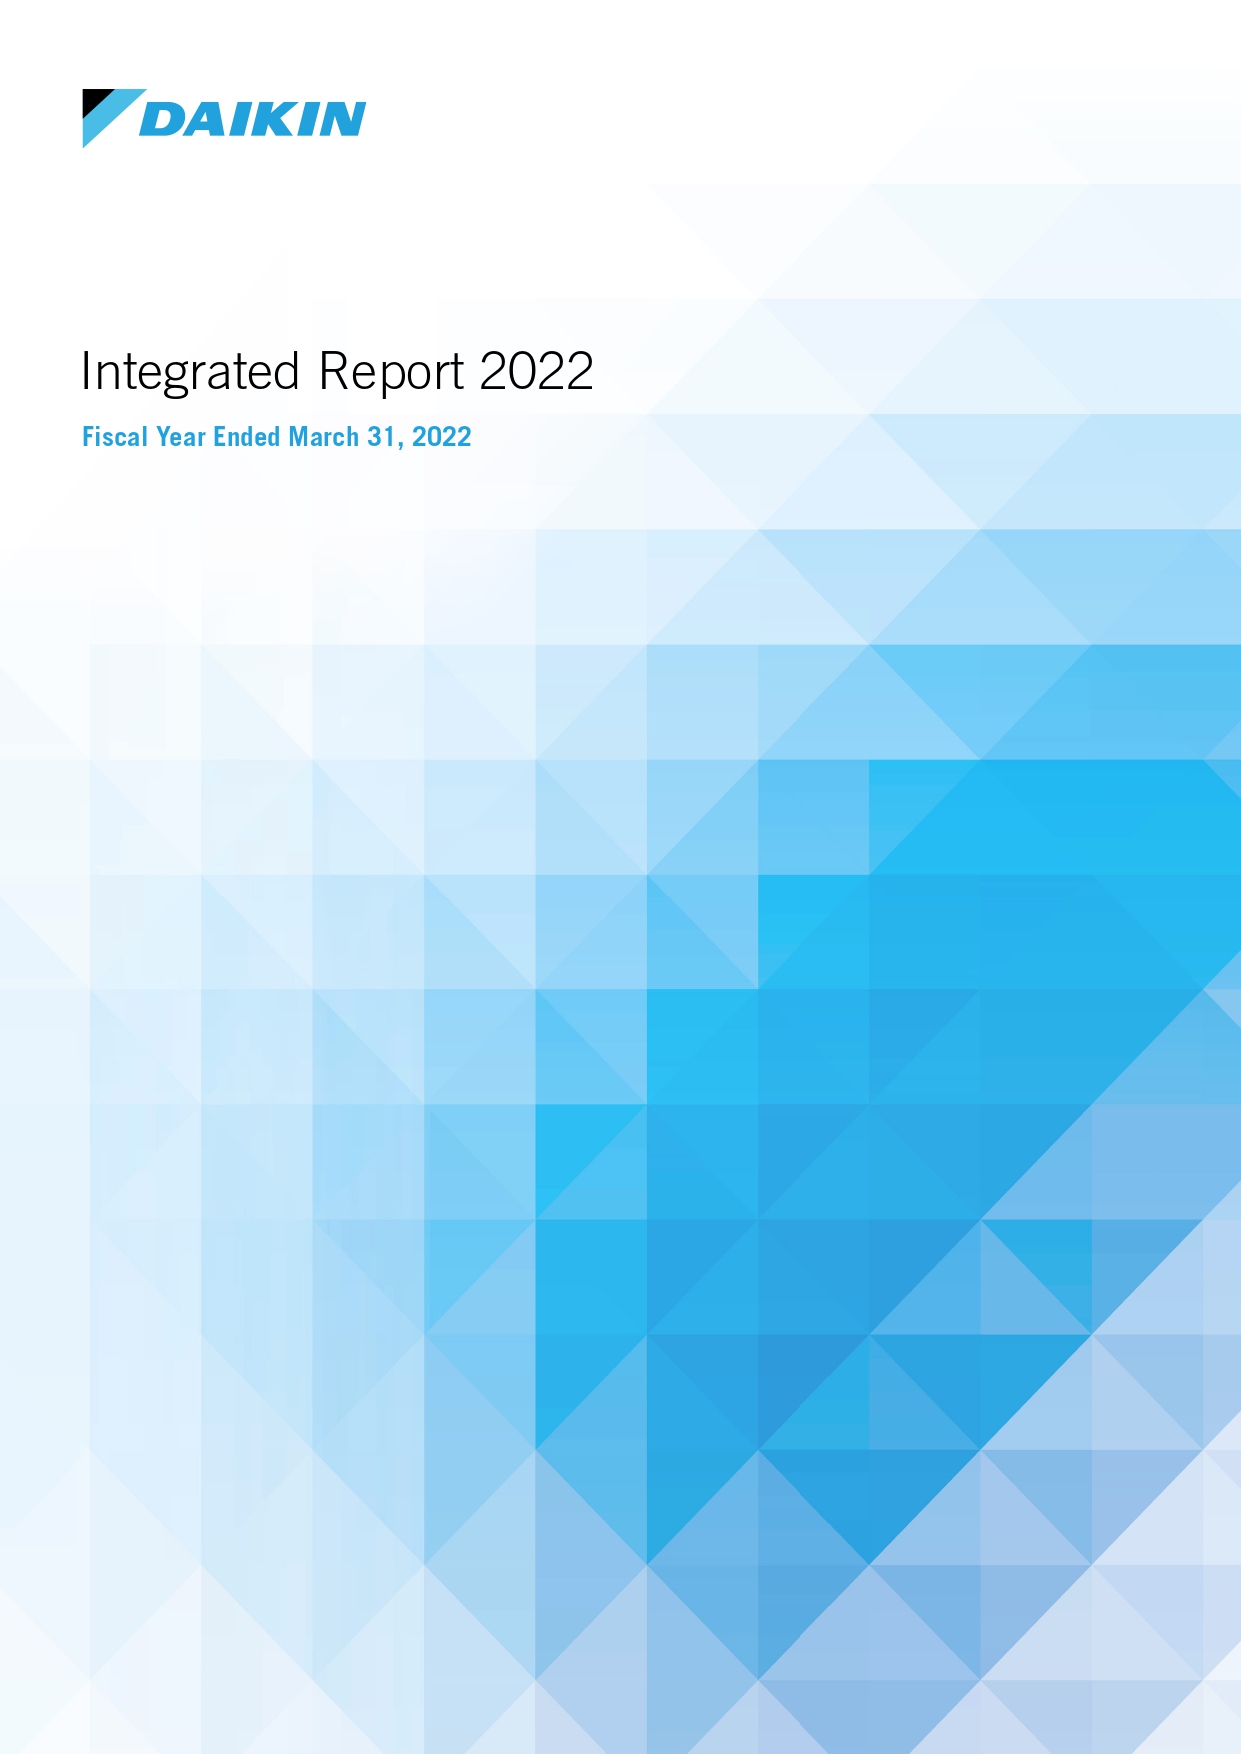 Image:Integrated Report 2022